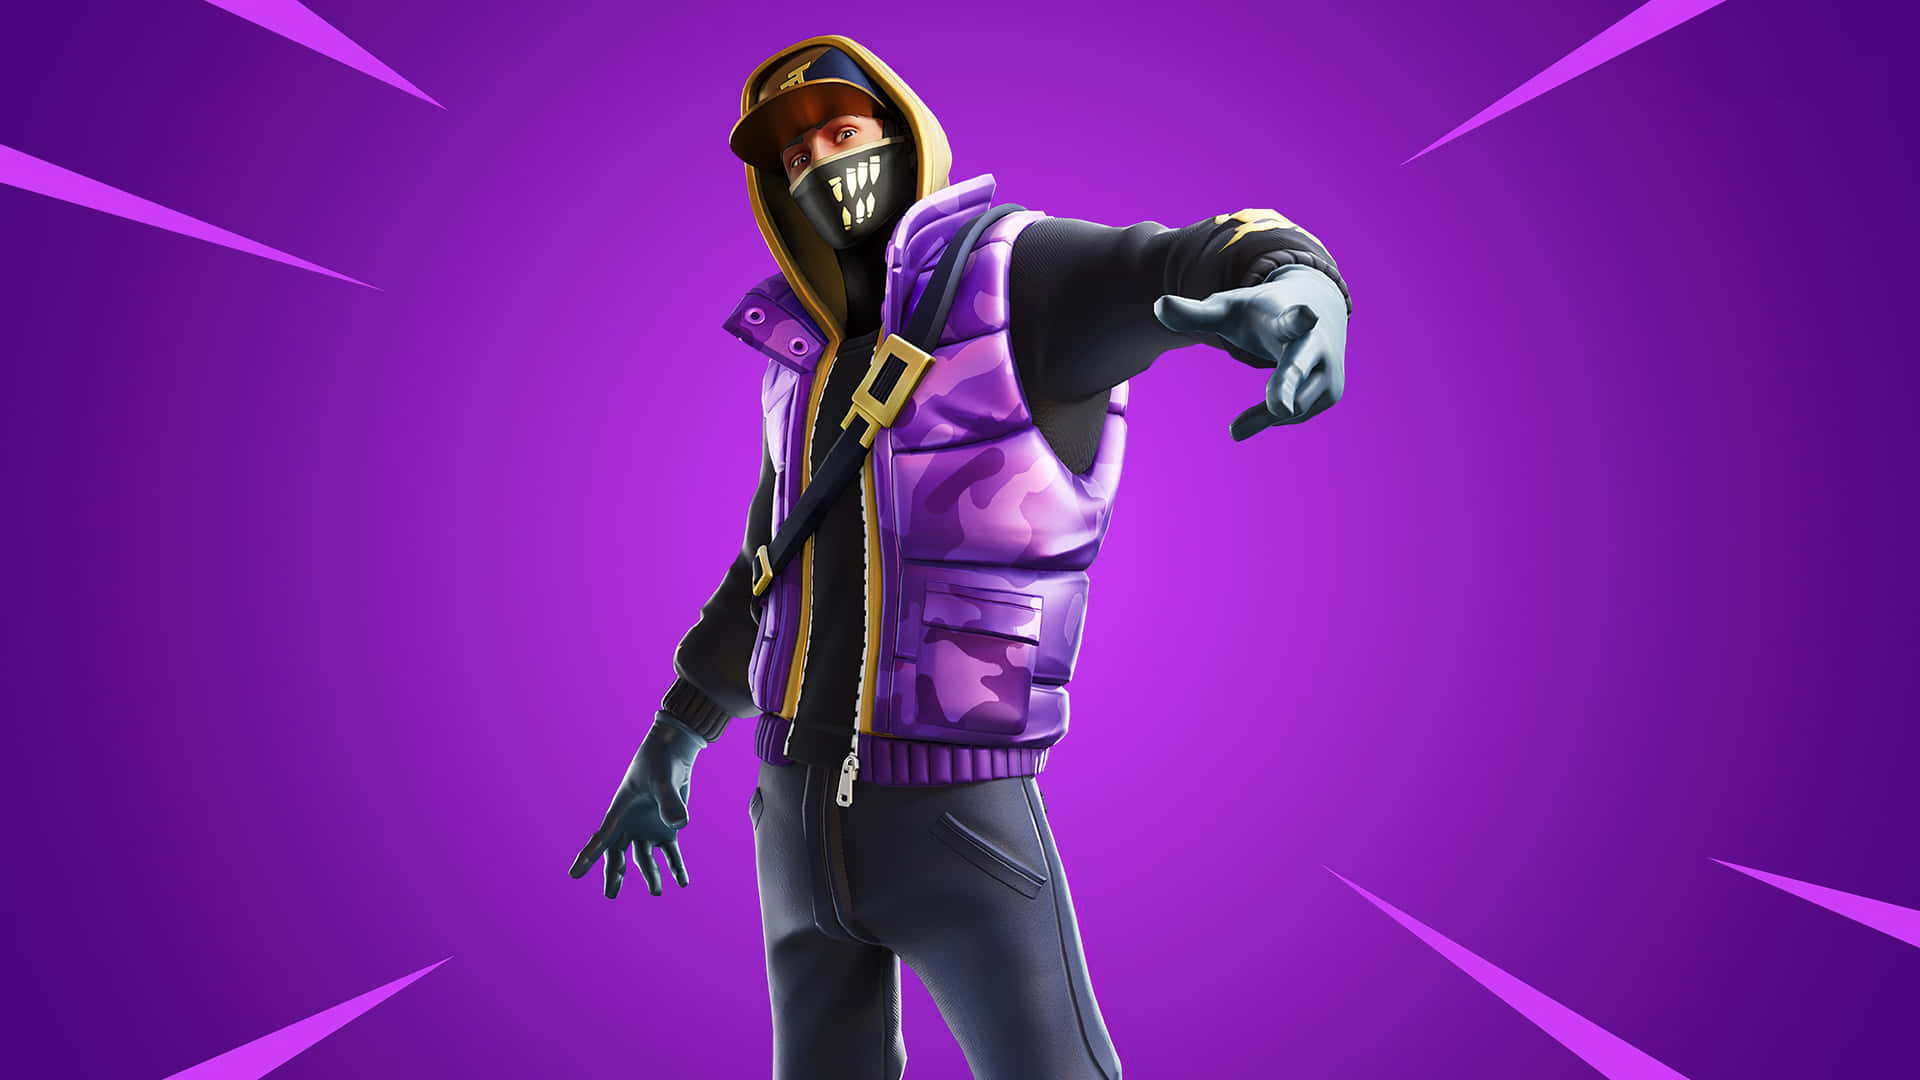 Experience the excitement of Fortnite with its edgy purple look Wallpaper